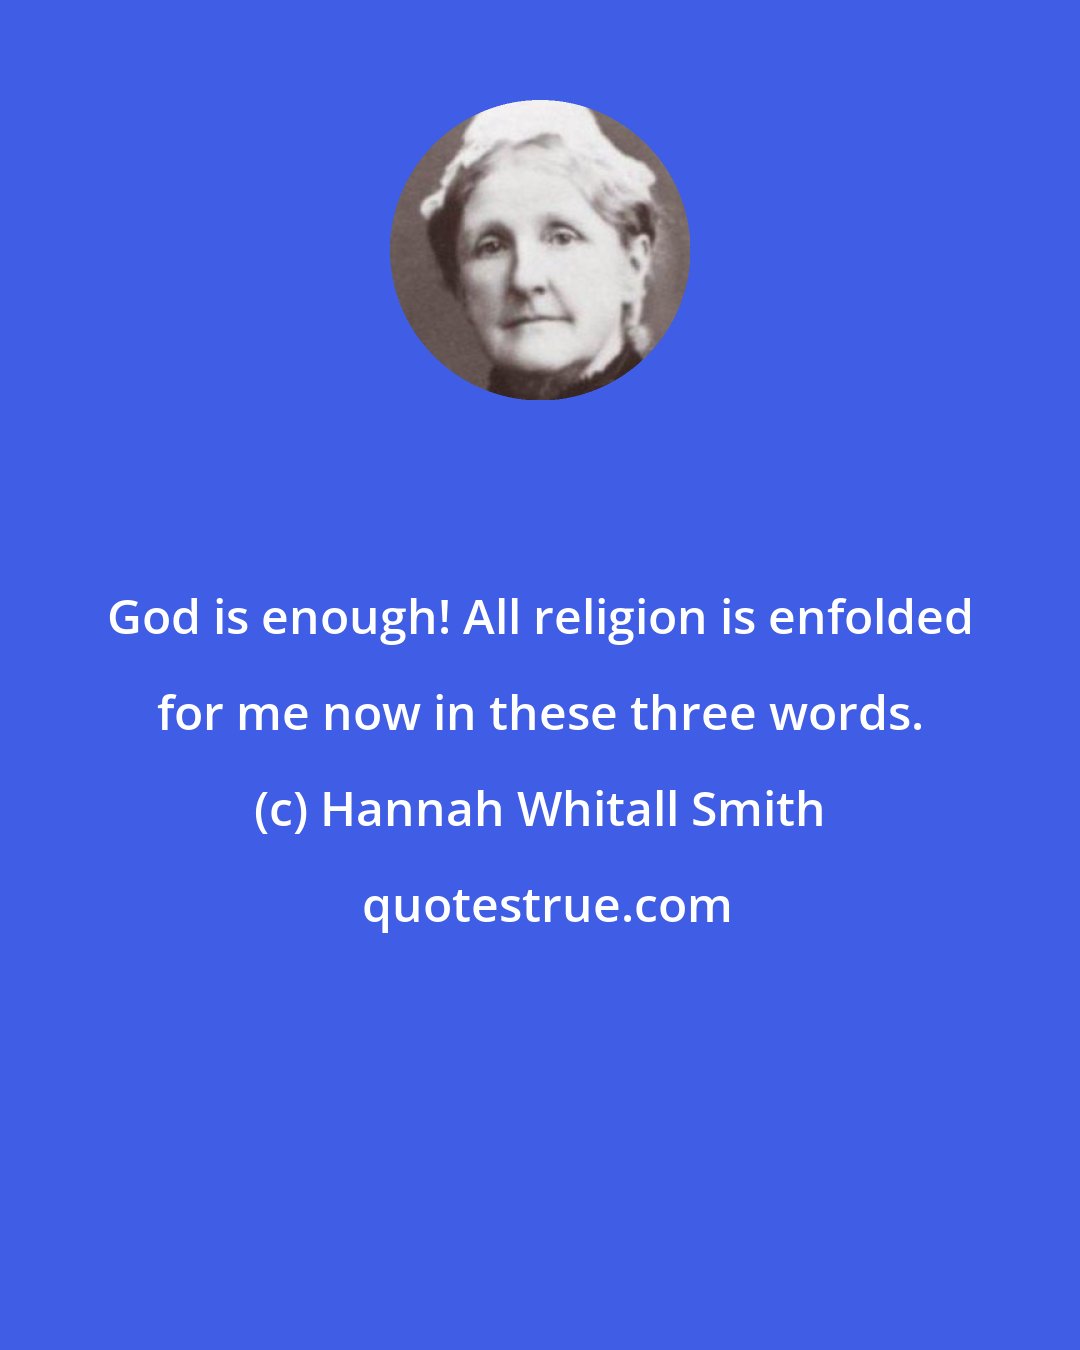 Hannah Whitall Smith: God is enough! All religion is enfolded for me now in these three words.